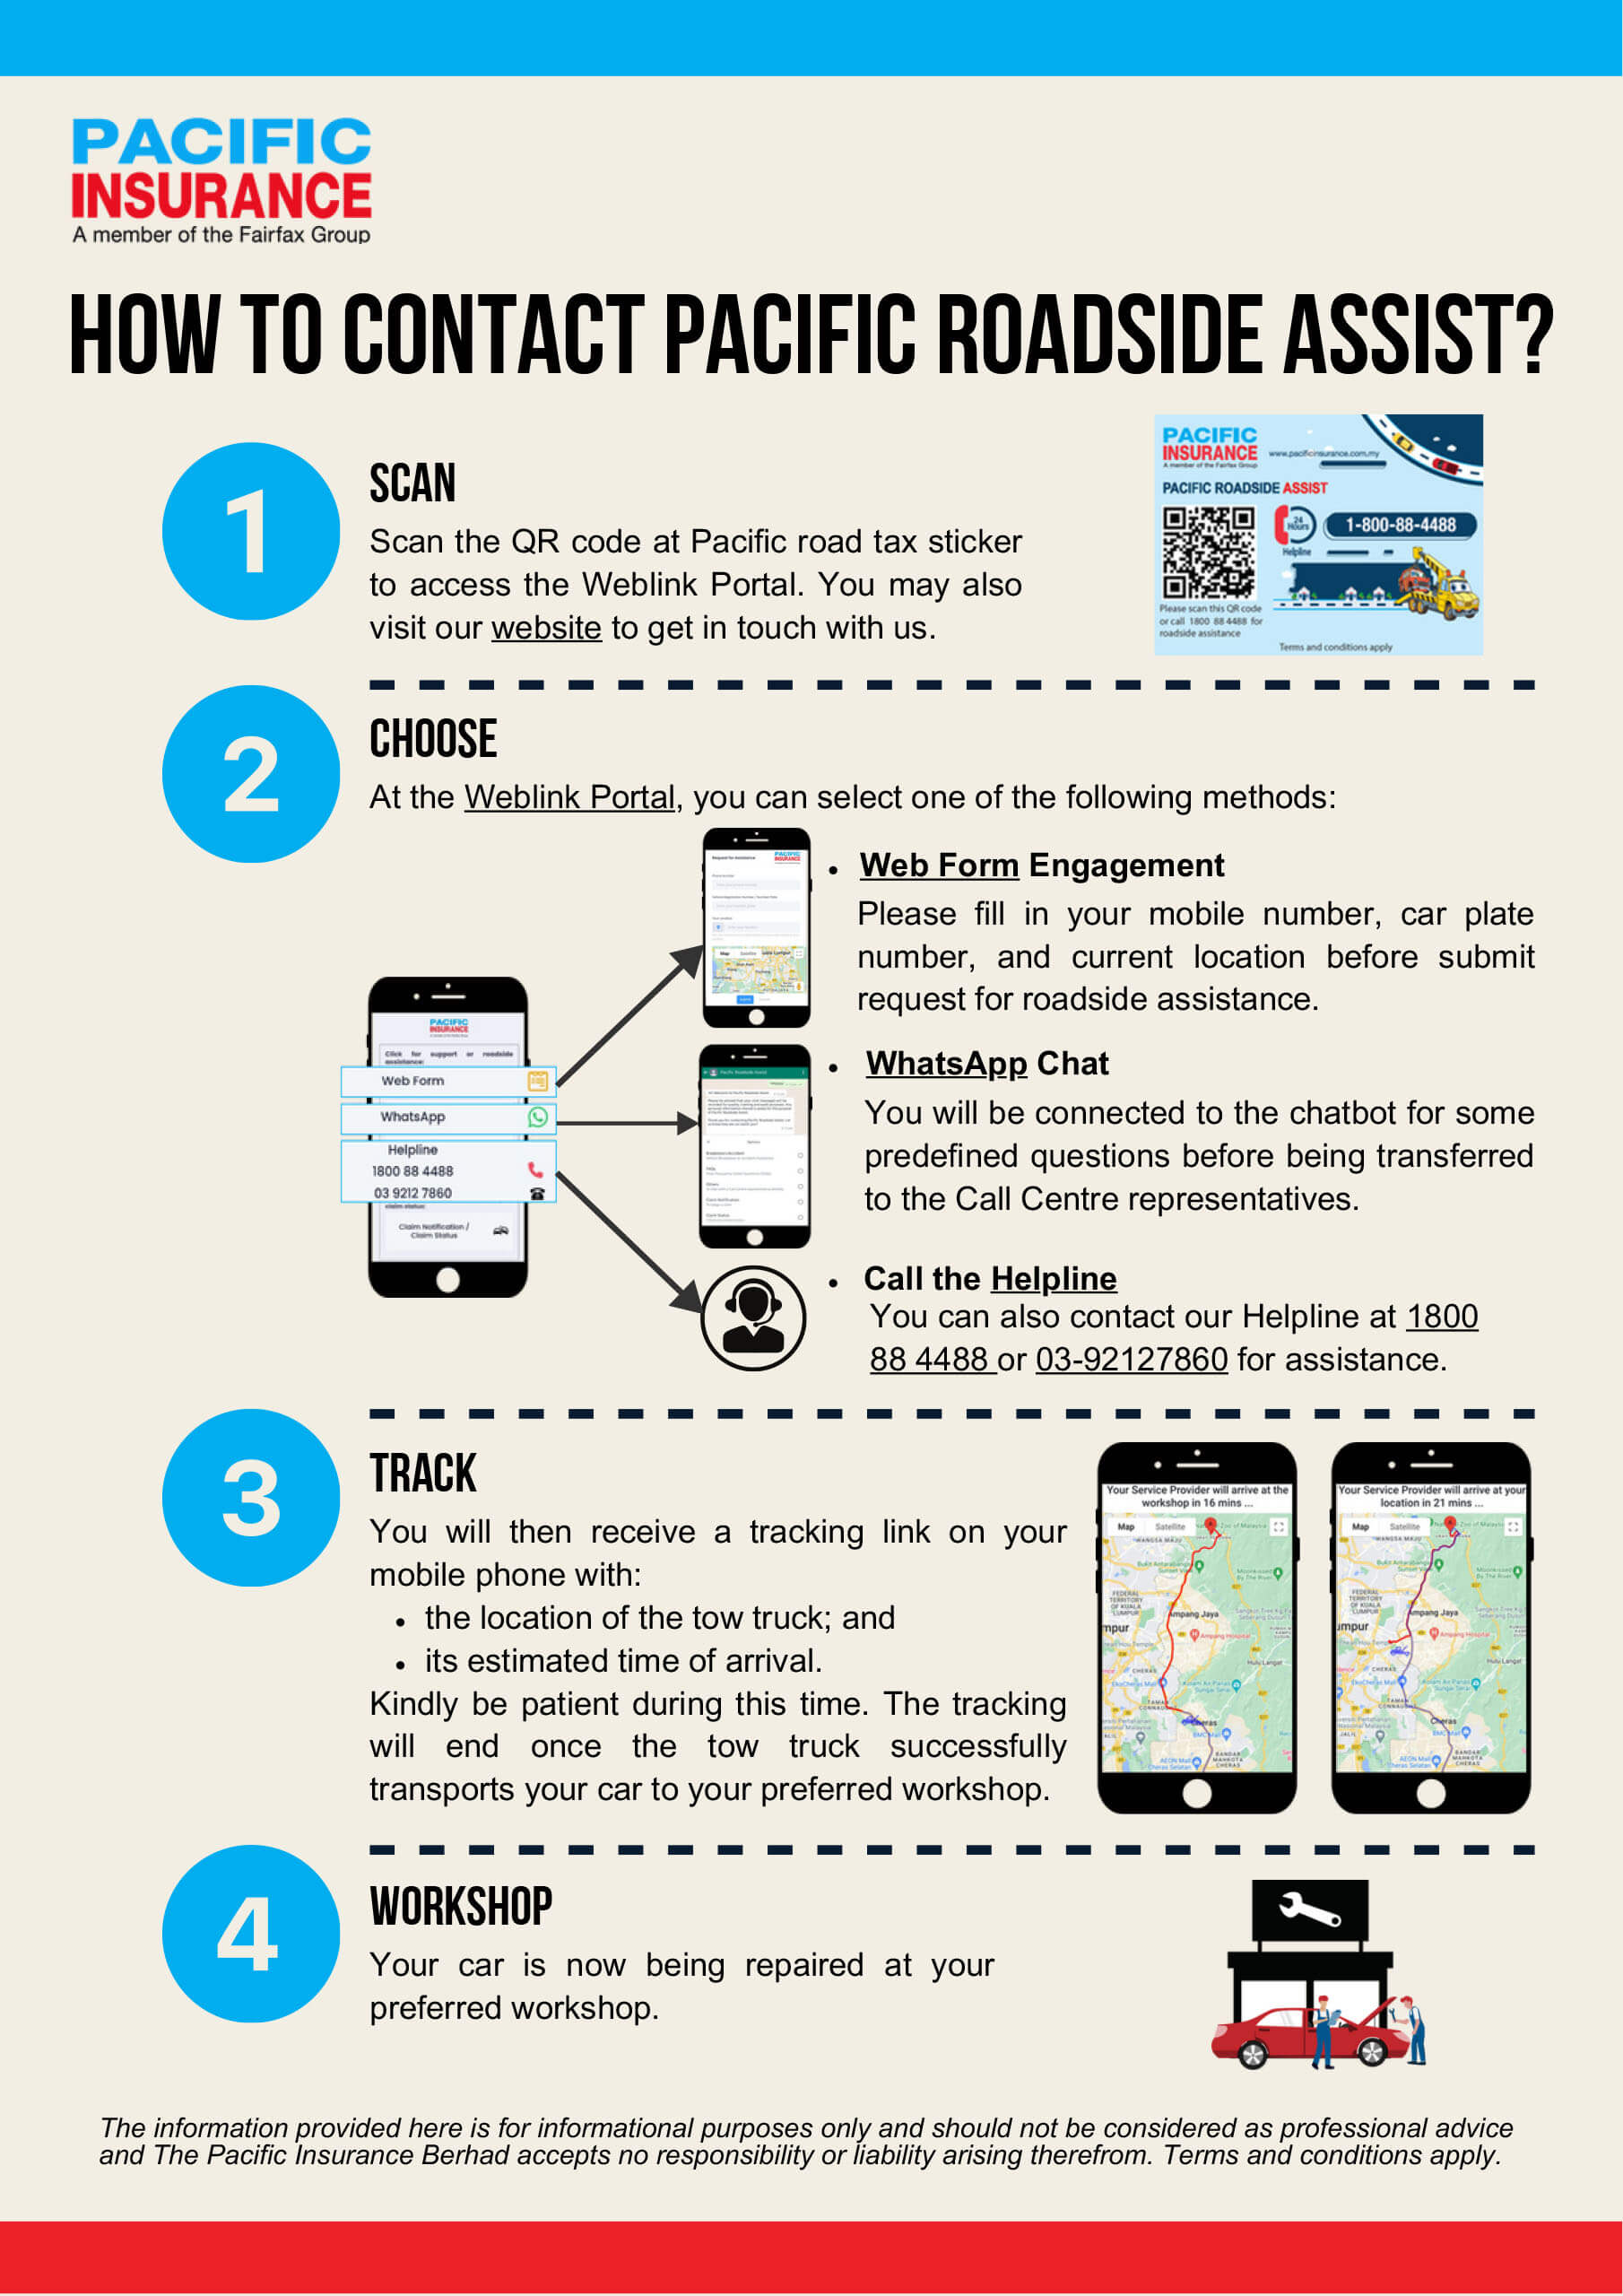 How to Contact Pacific Roadside Assist?